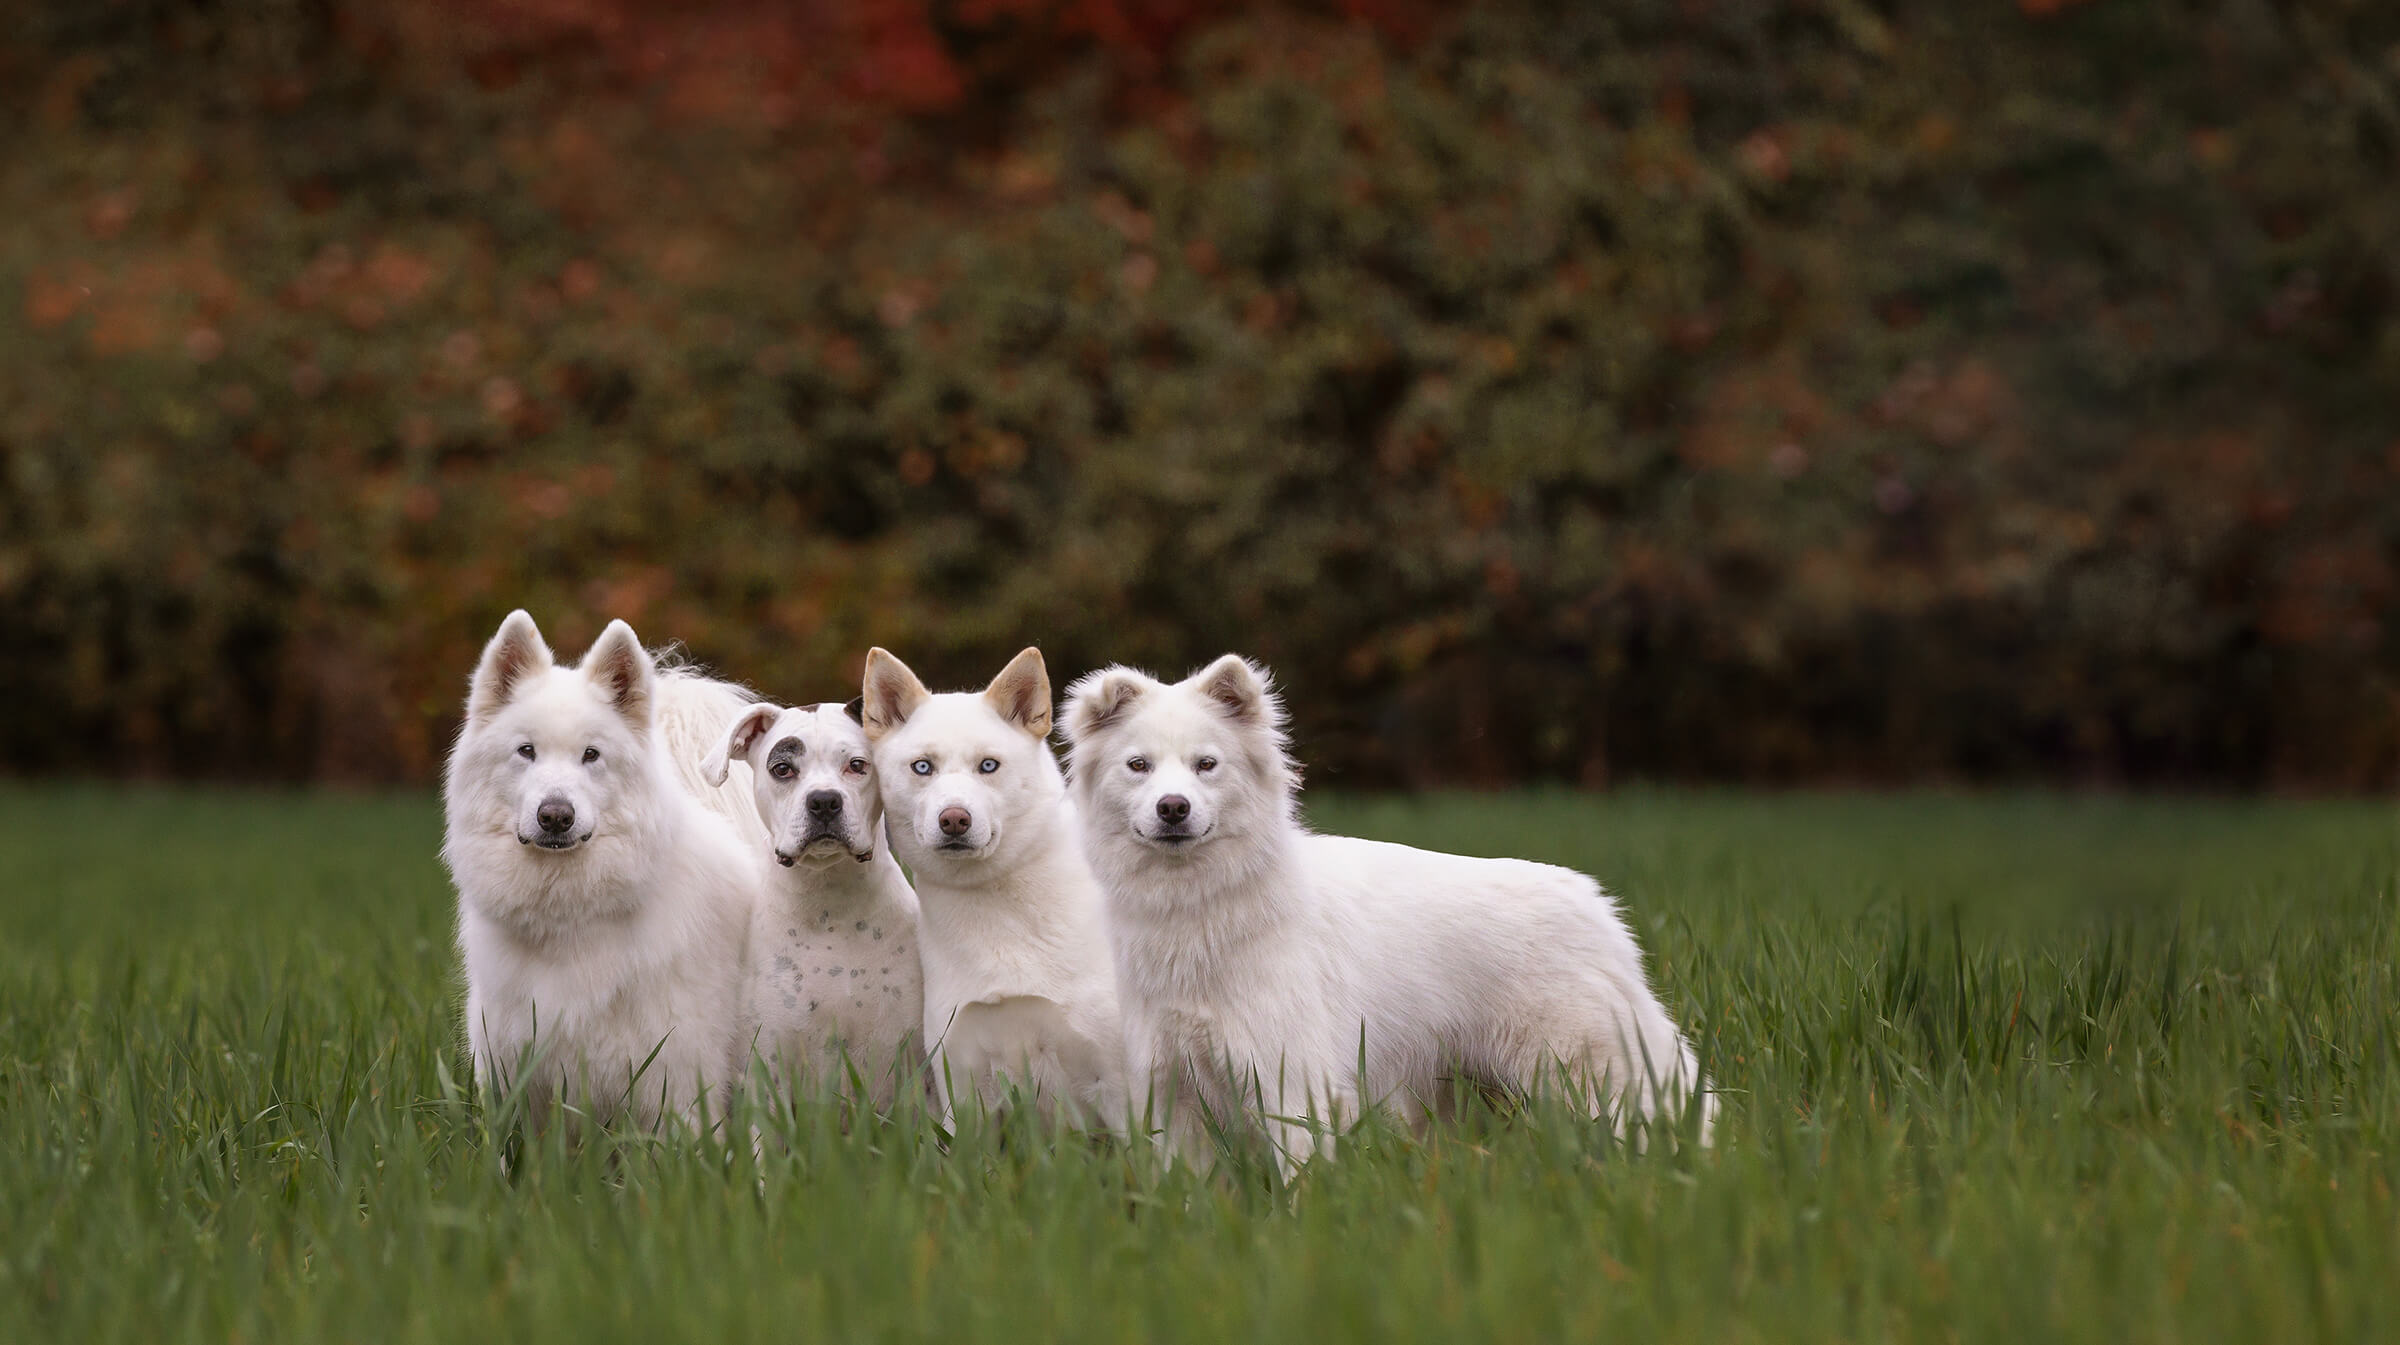 Four white dogs photographed in green grass by Toronto photographer Karen Weiler